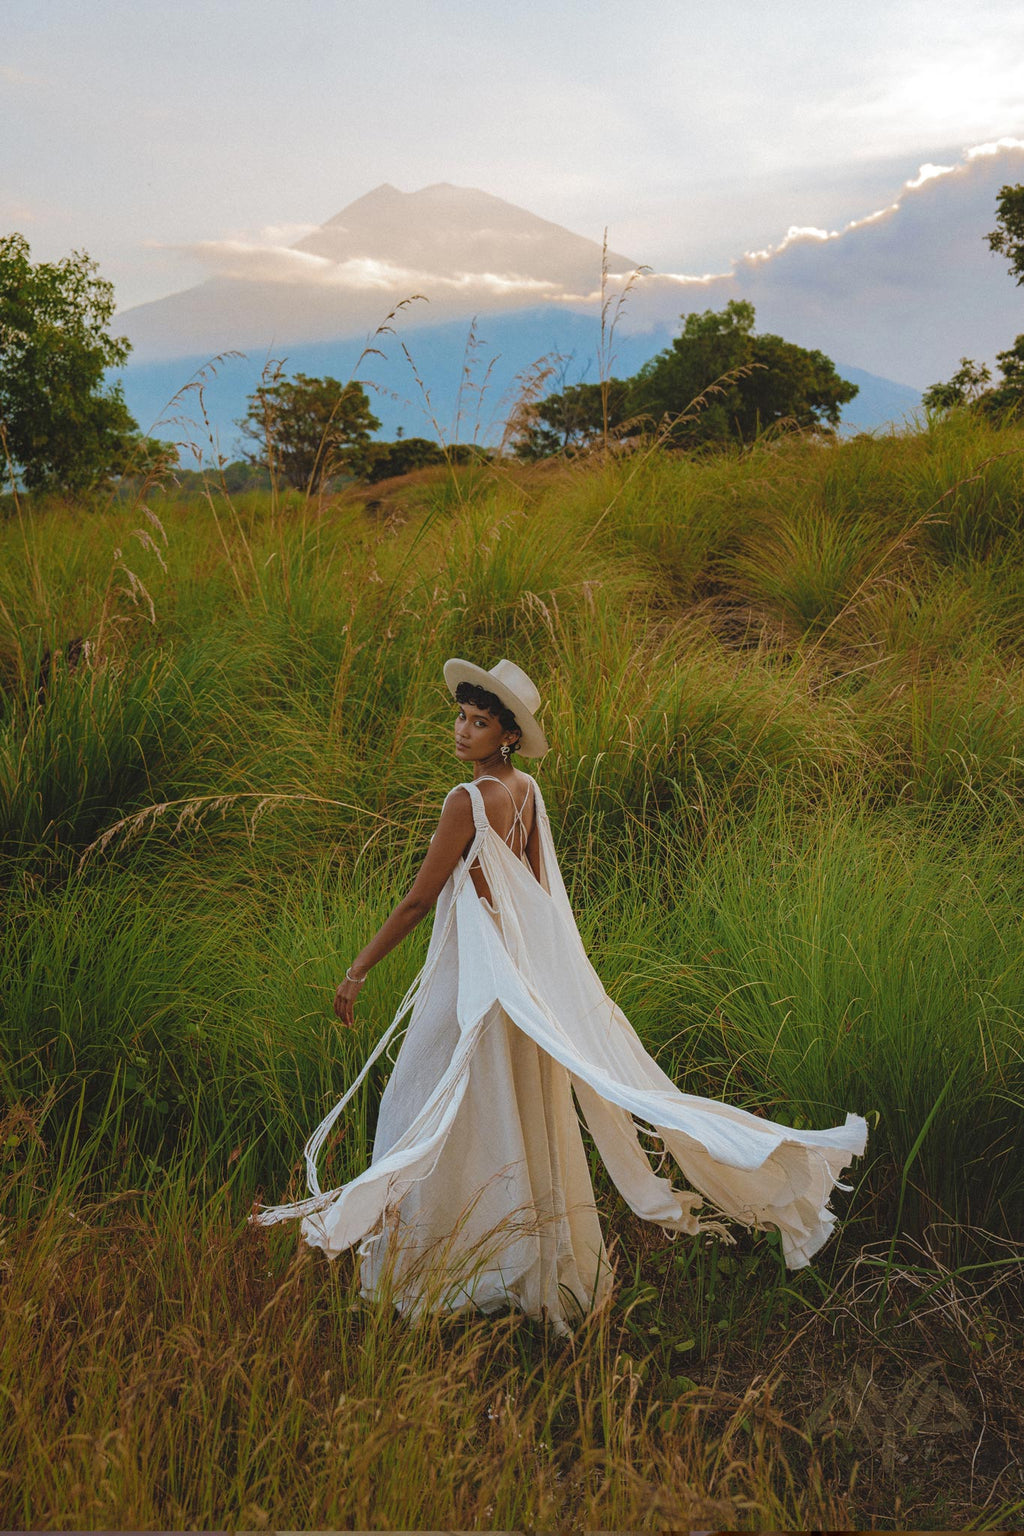 Look angelic in the Off-White Greek Goddess Cape Dress from Aya Sacred Wear.